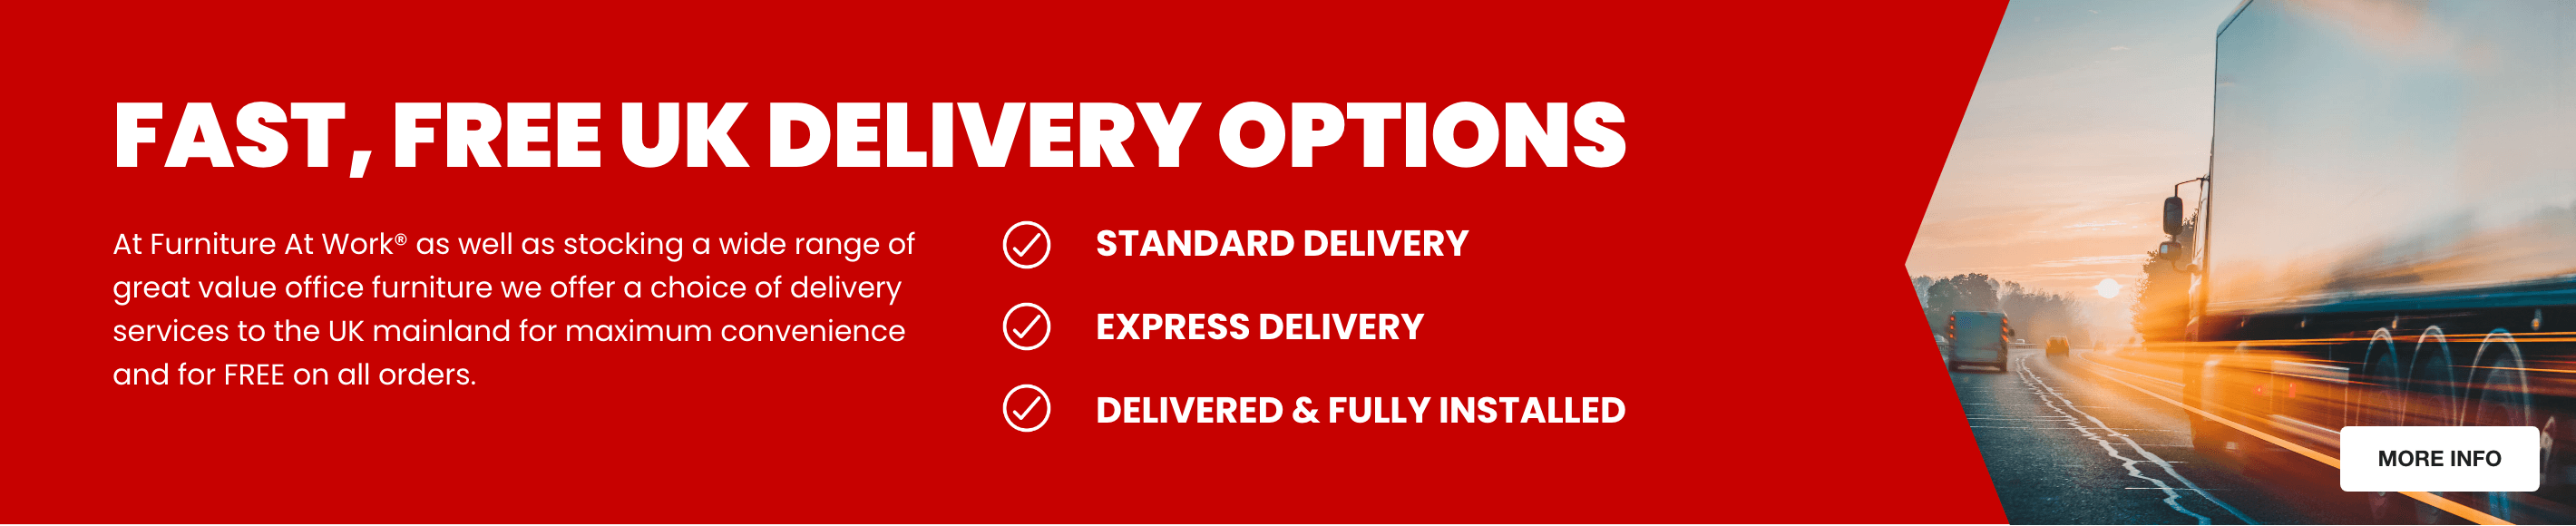 Fast, free UK delivery options